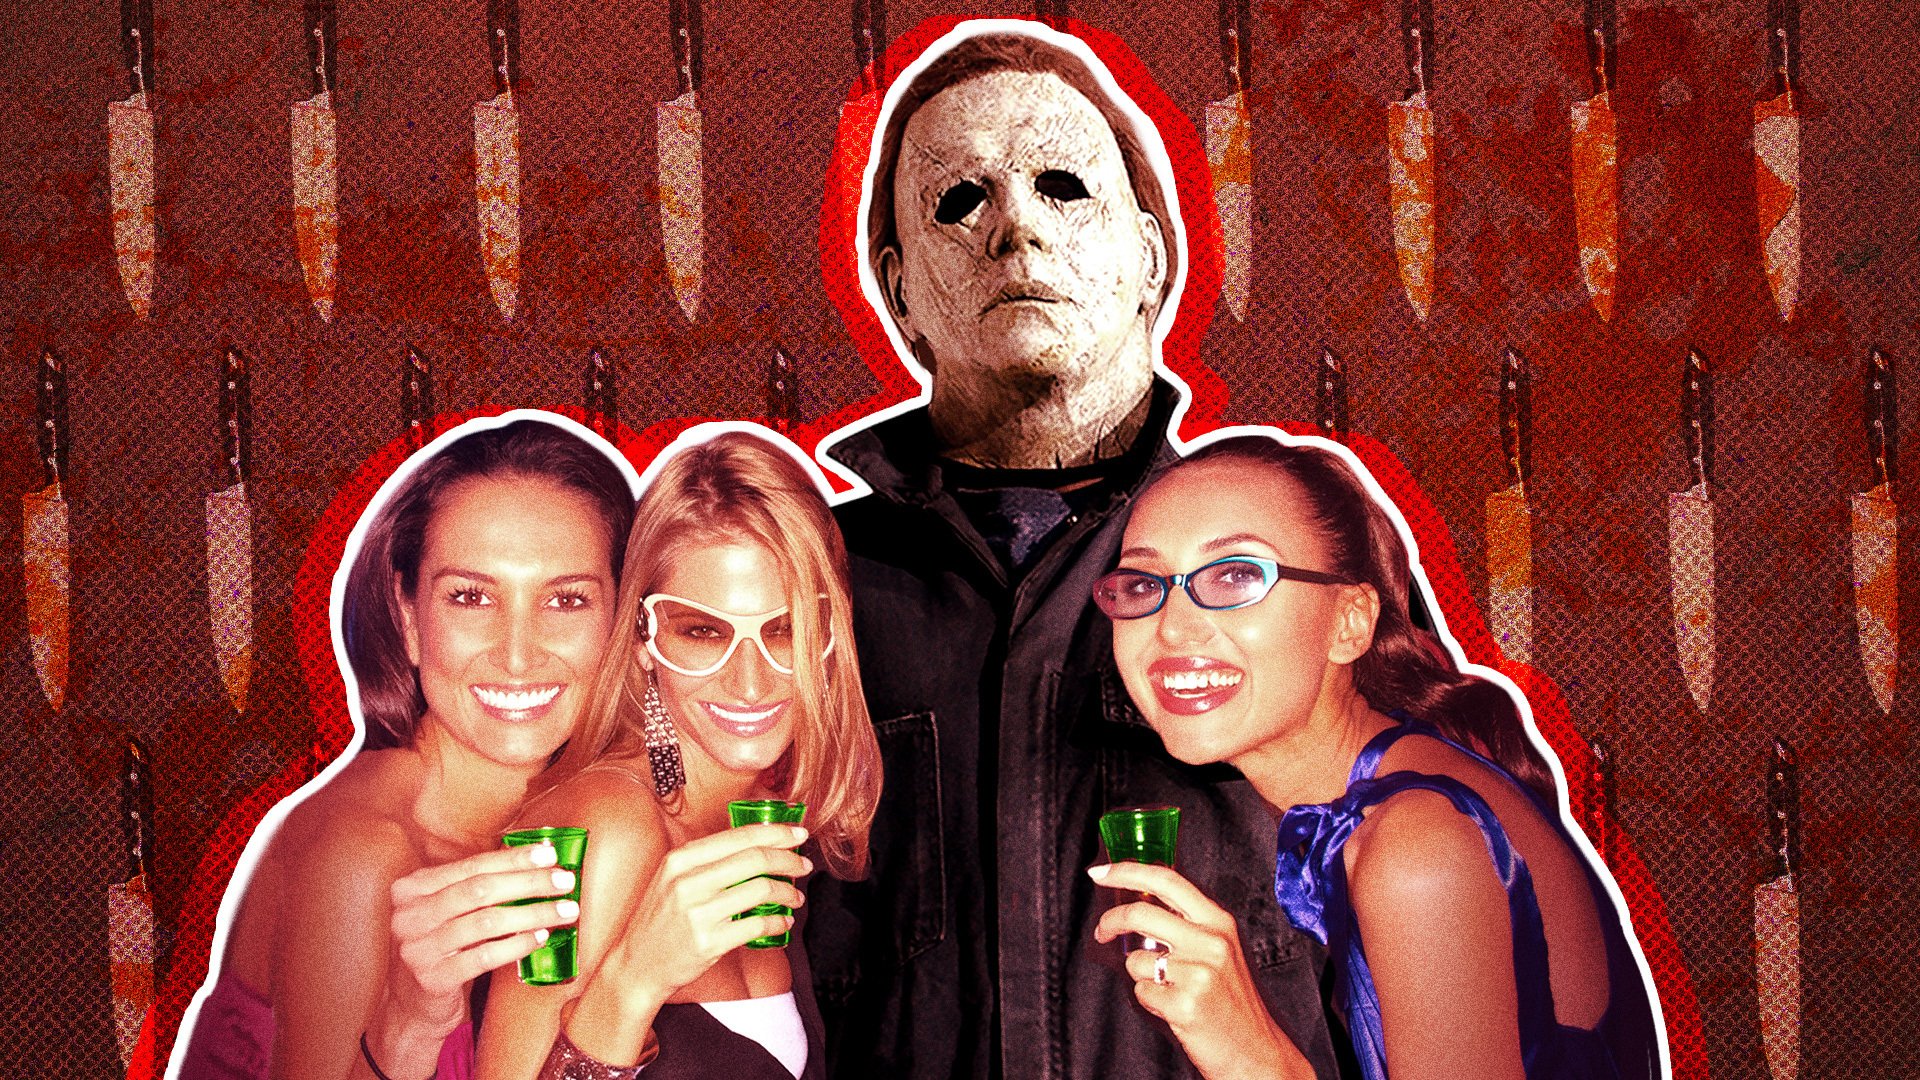 Michael Myers tops Google Halloween search trends in a surprising way